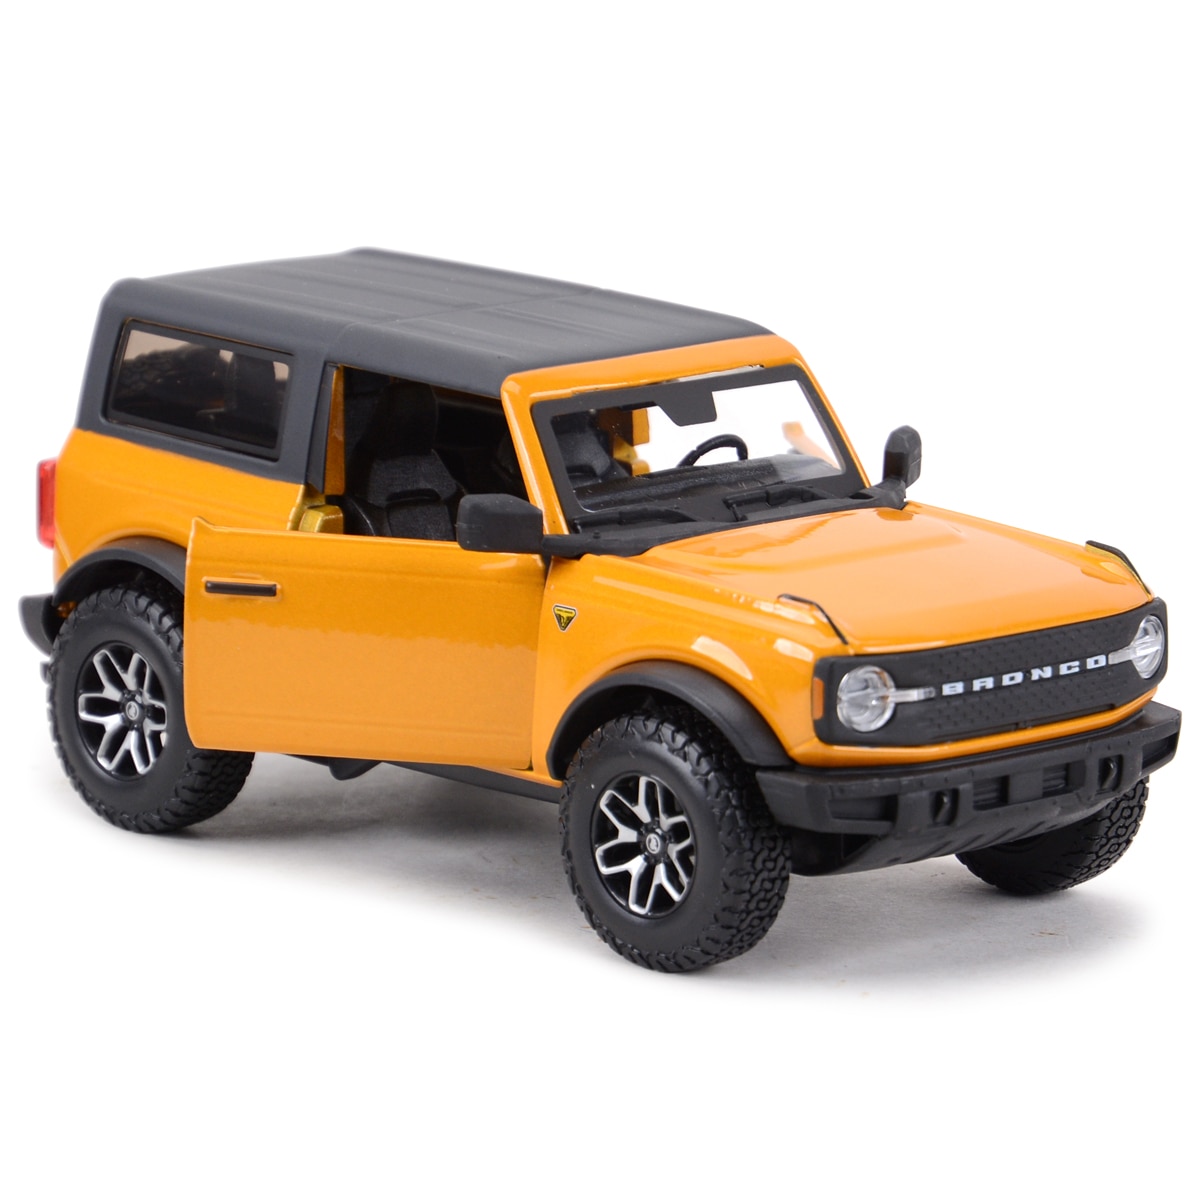 Машинка Maisto 31530, 1:24 SP (B) 2021 Ford Bronco (2 Doors Version) maisto 1 24 new modified version 1967 ford mustang gt modified alloy car model collection gift toy